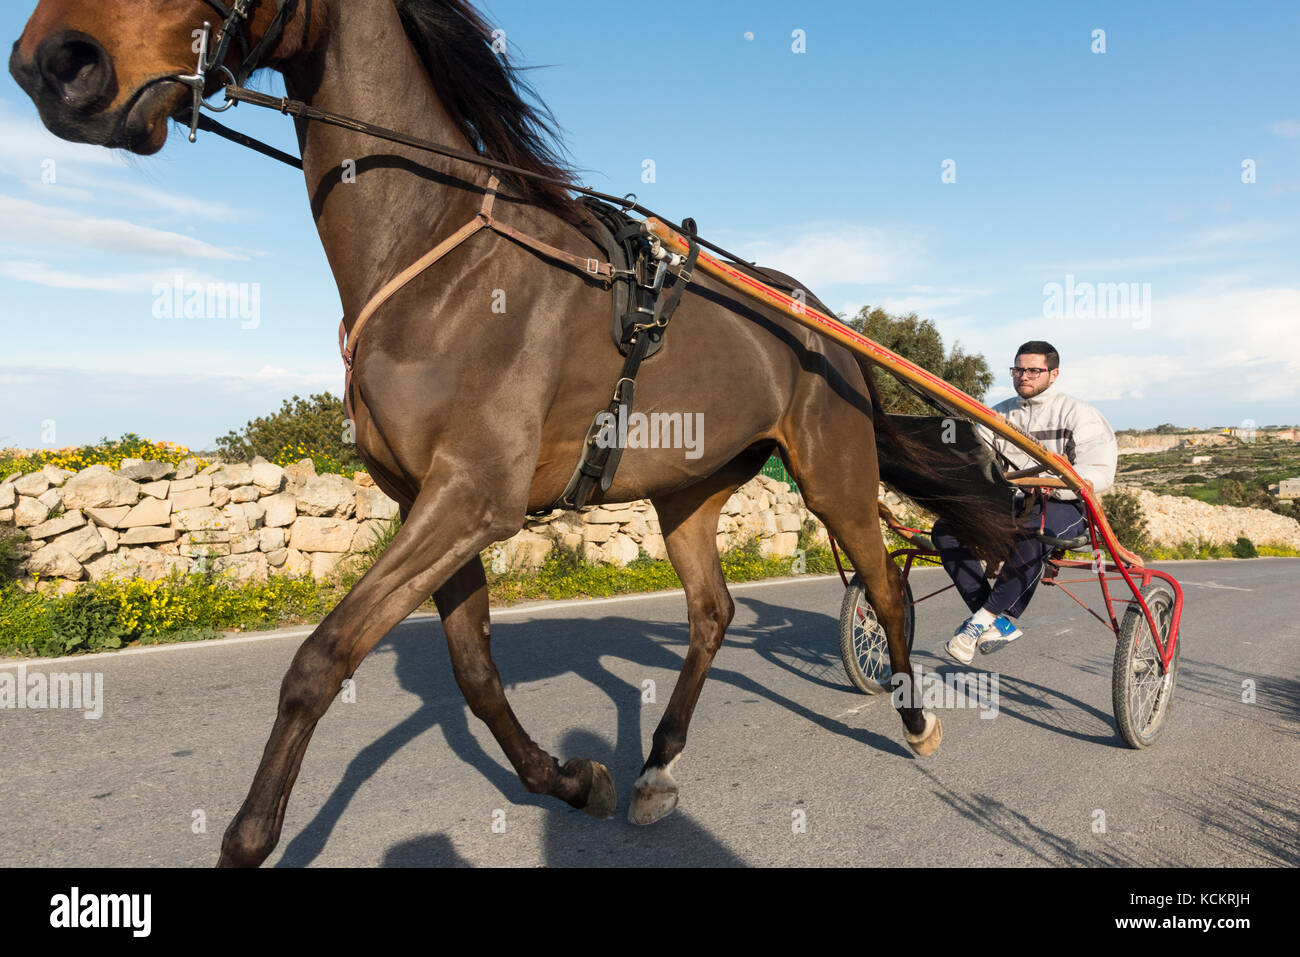 A man driving a racing horse and cart or carriage on a road in the countryside in Malta Stock Photo